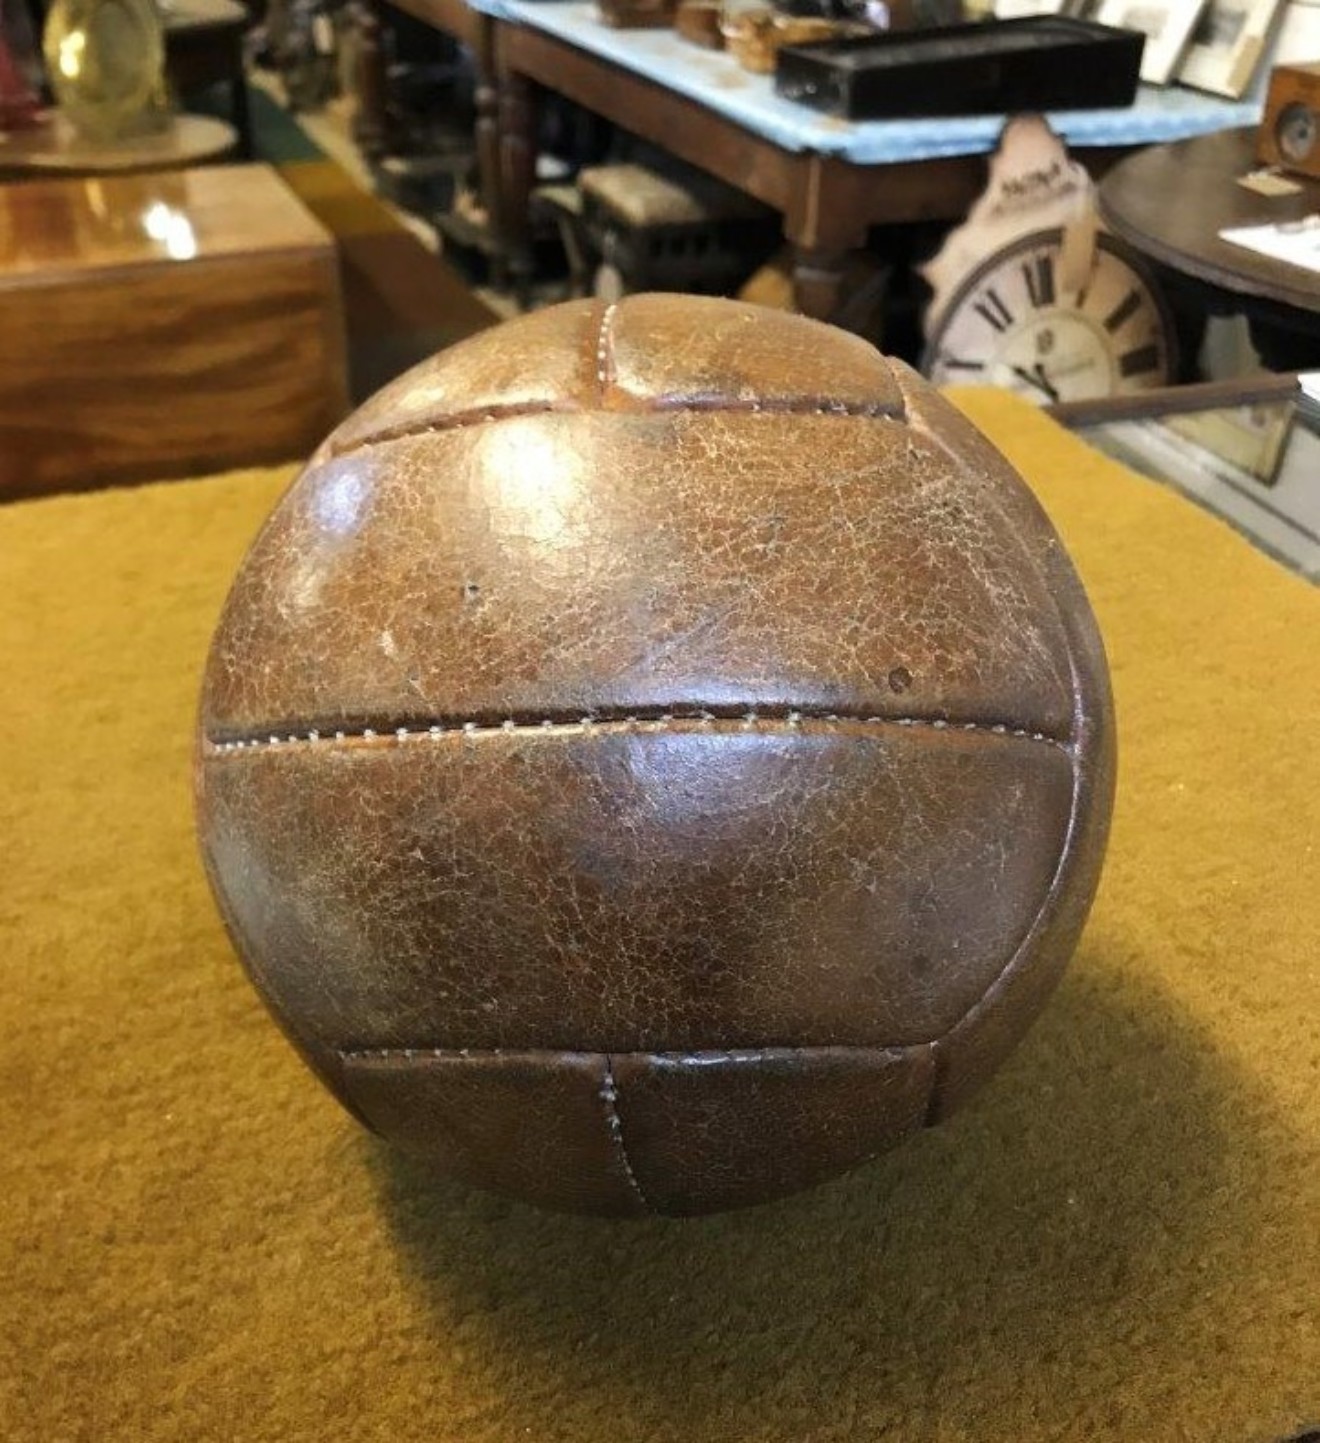 Vintage 1960s Leather 12 Panel Hand Stitched Football Size 5